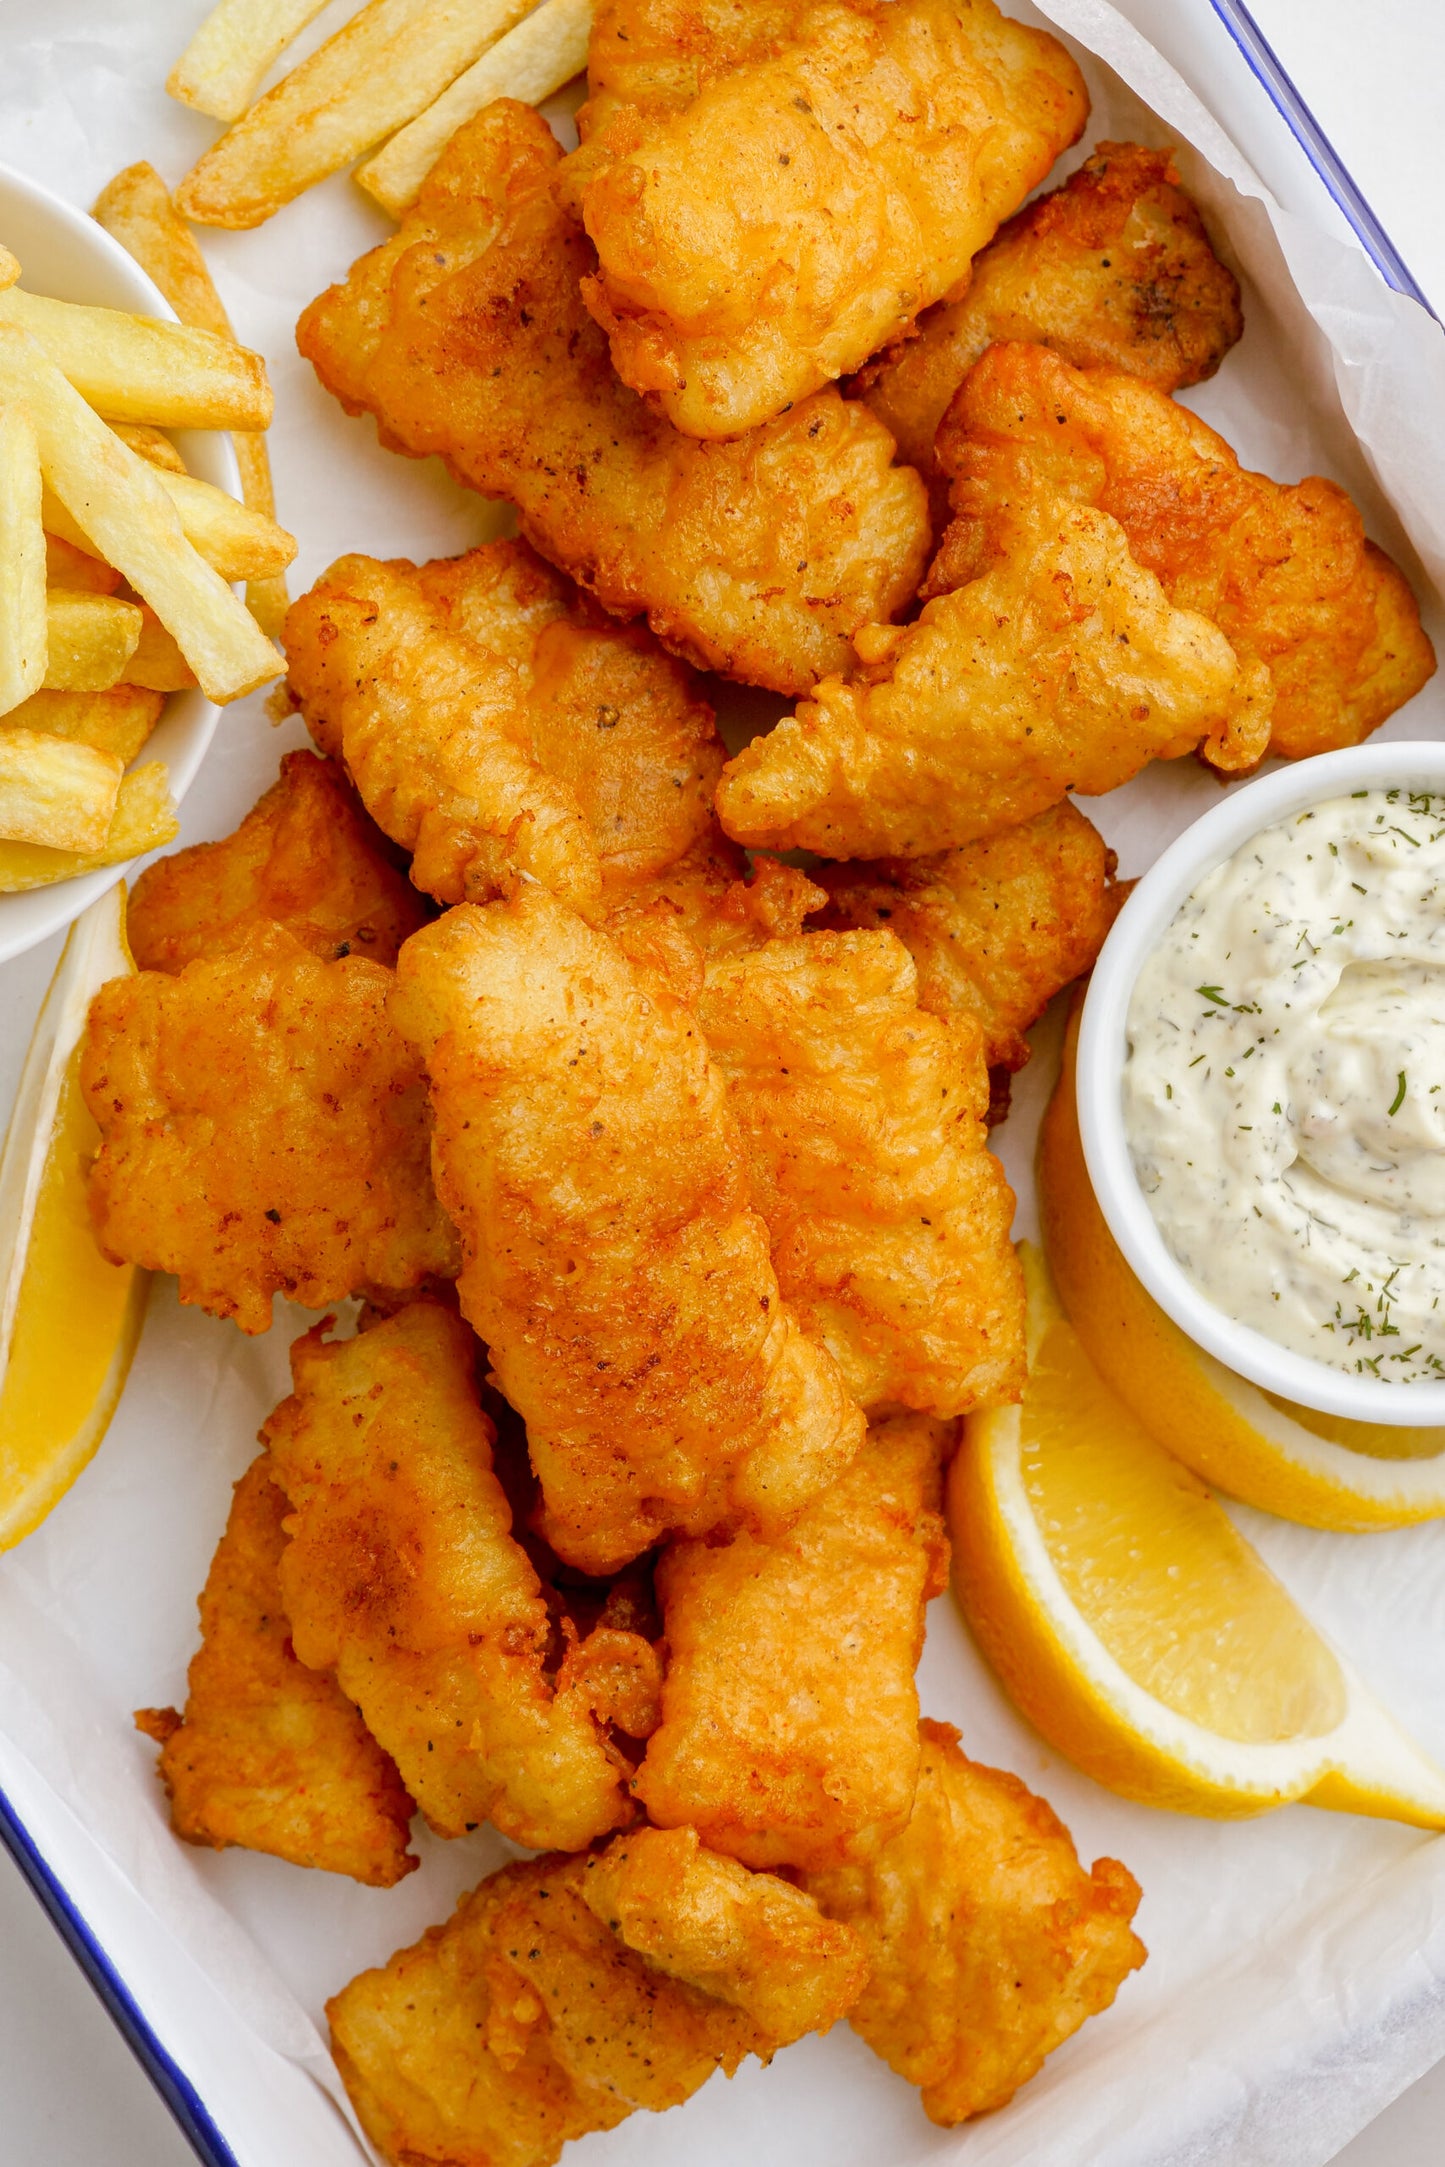 Fried Whiting Fillets (Family Special Deals)